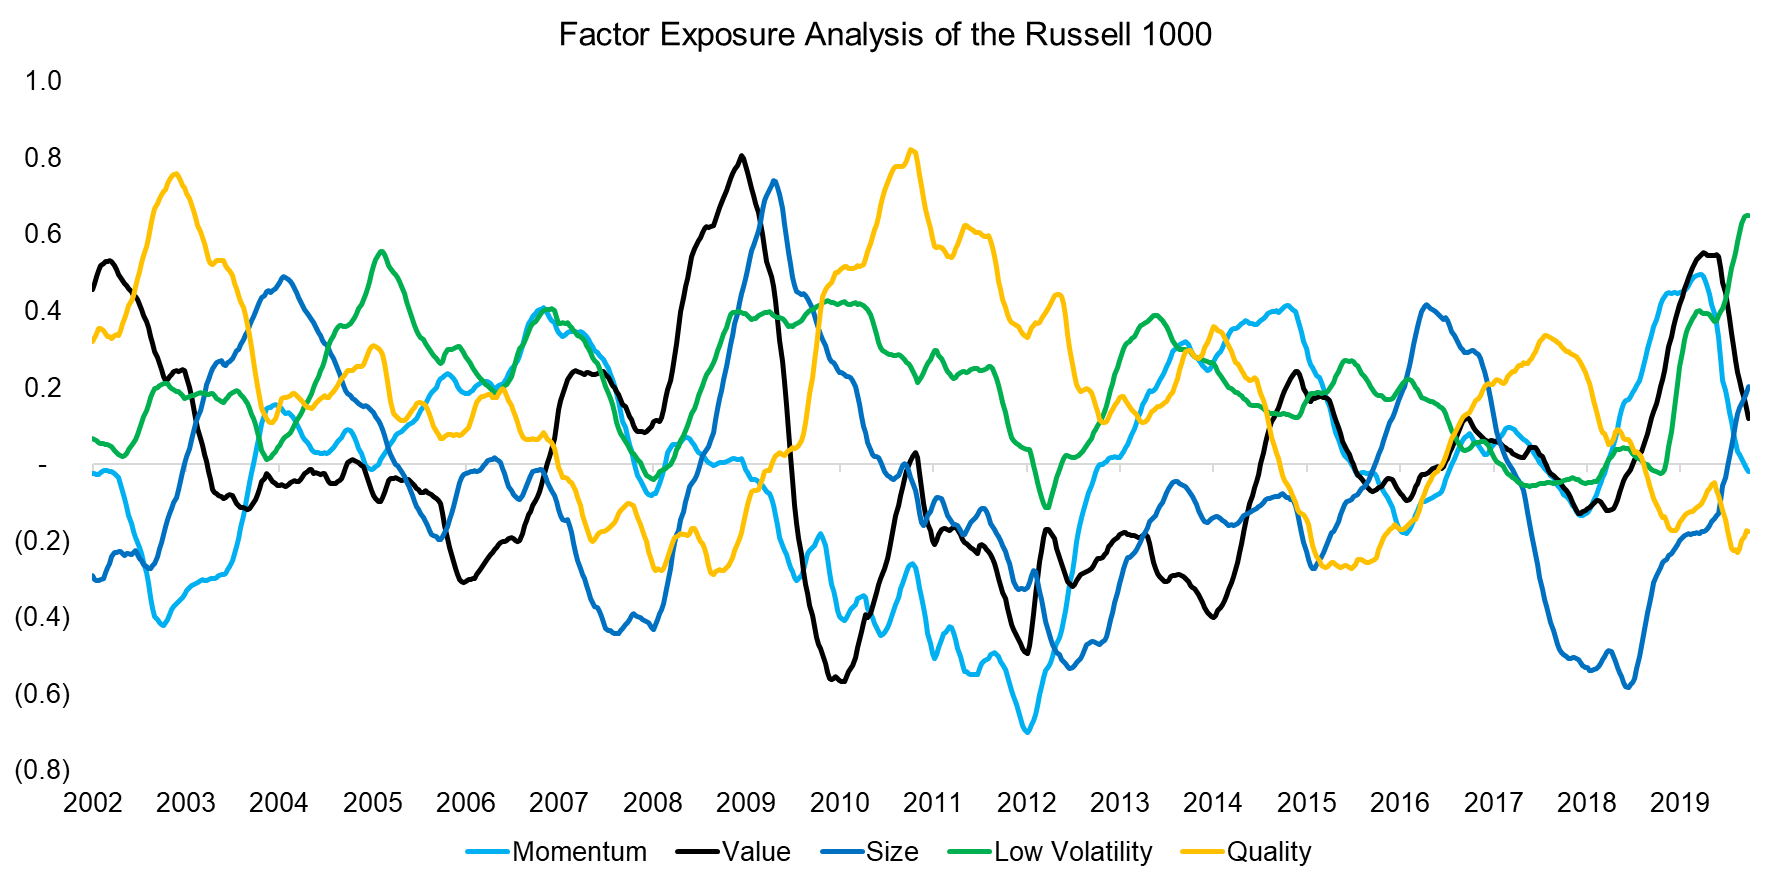 Factor Exposure Analysis of the Russell 1000